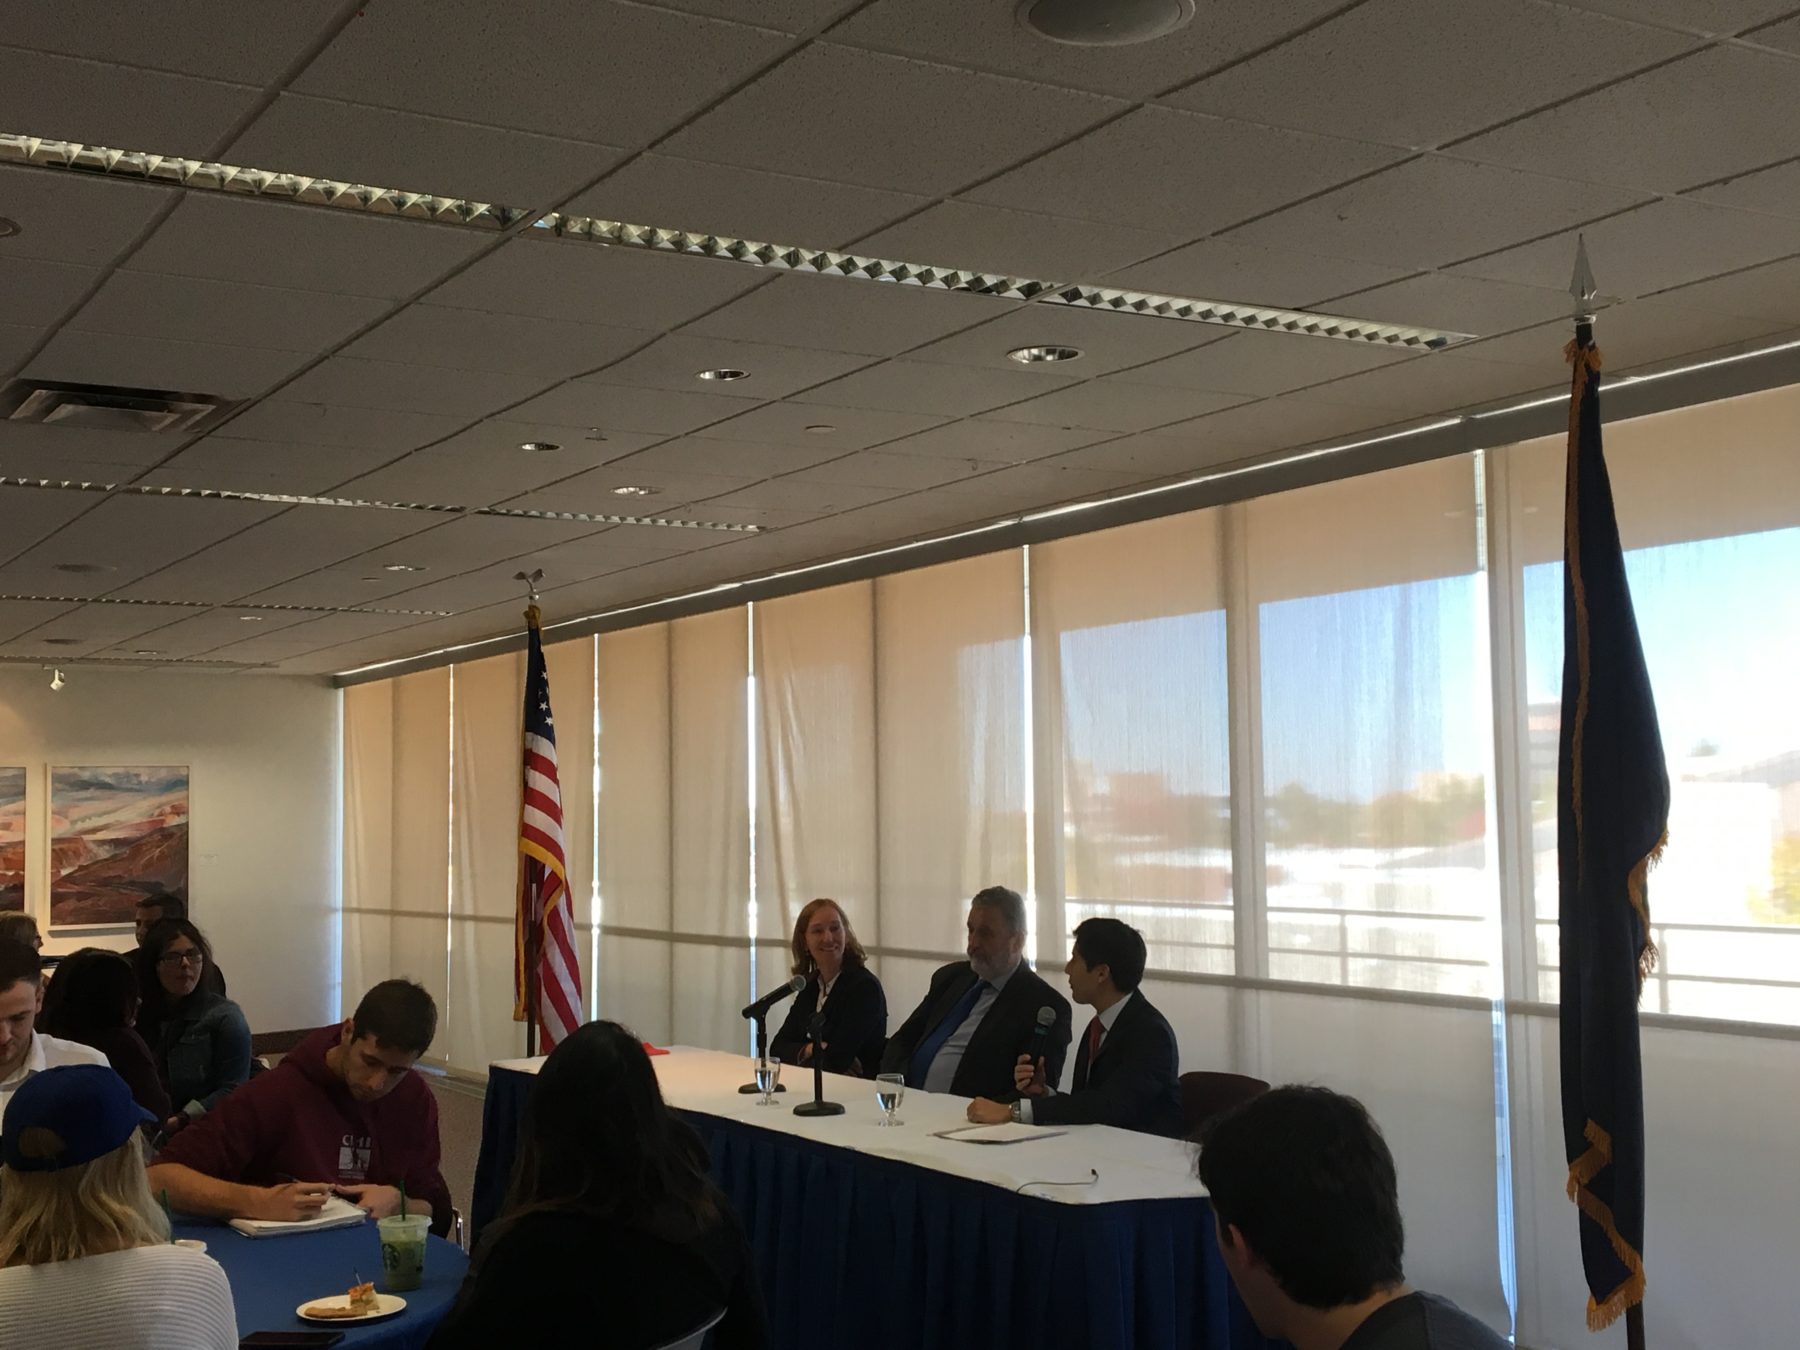 Amb. Haber and Amb. Schuwer participate in a panel on transatlantic relations moderated by Steve Feldstein at Boise State University.